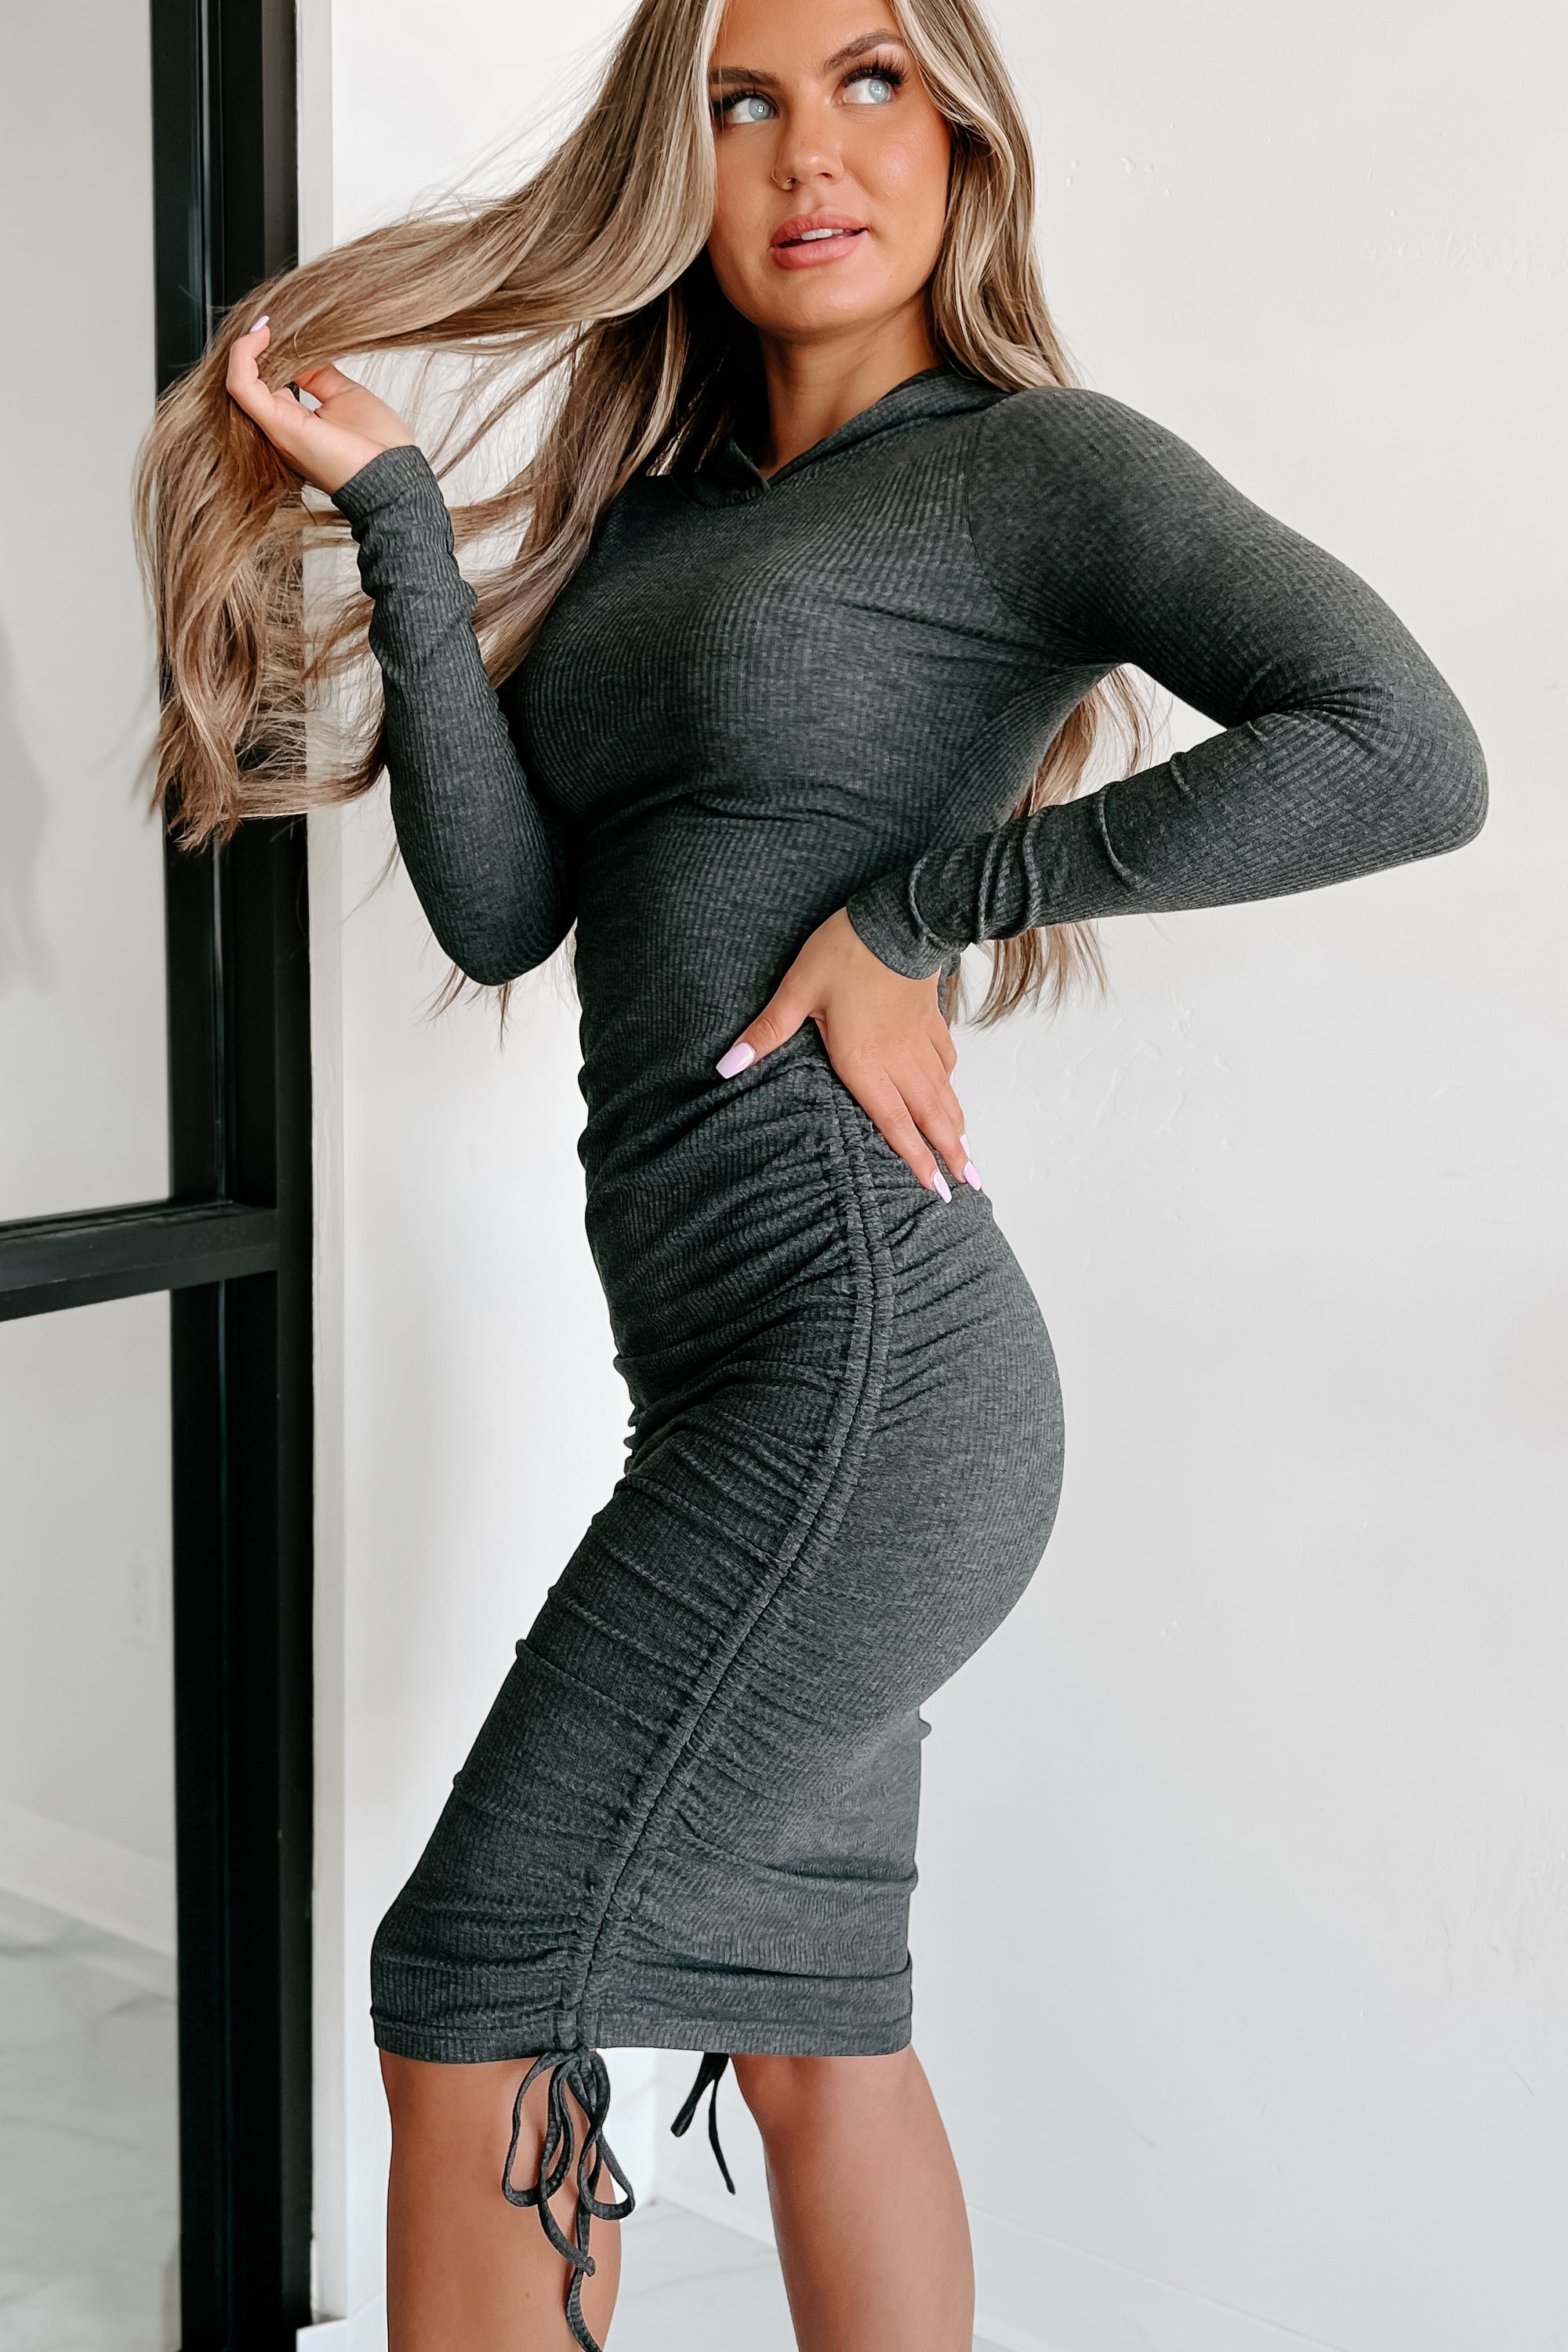 Don't Think About It Hooded Ruched Bodycon Dress (Charcoal) - NanaMacs